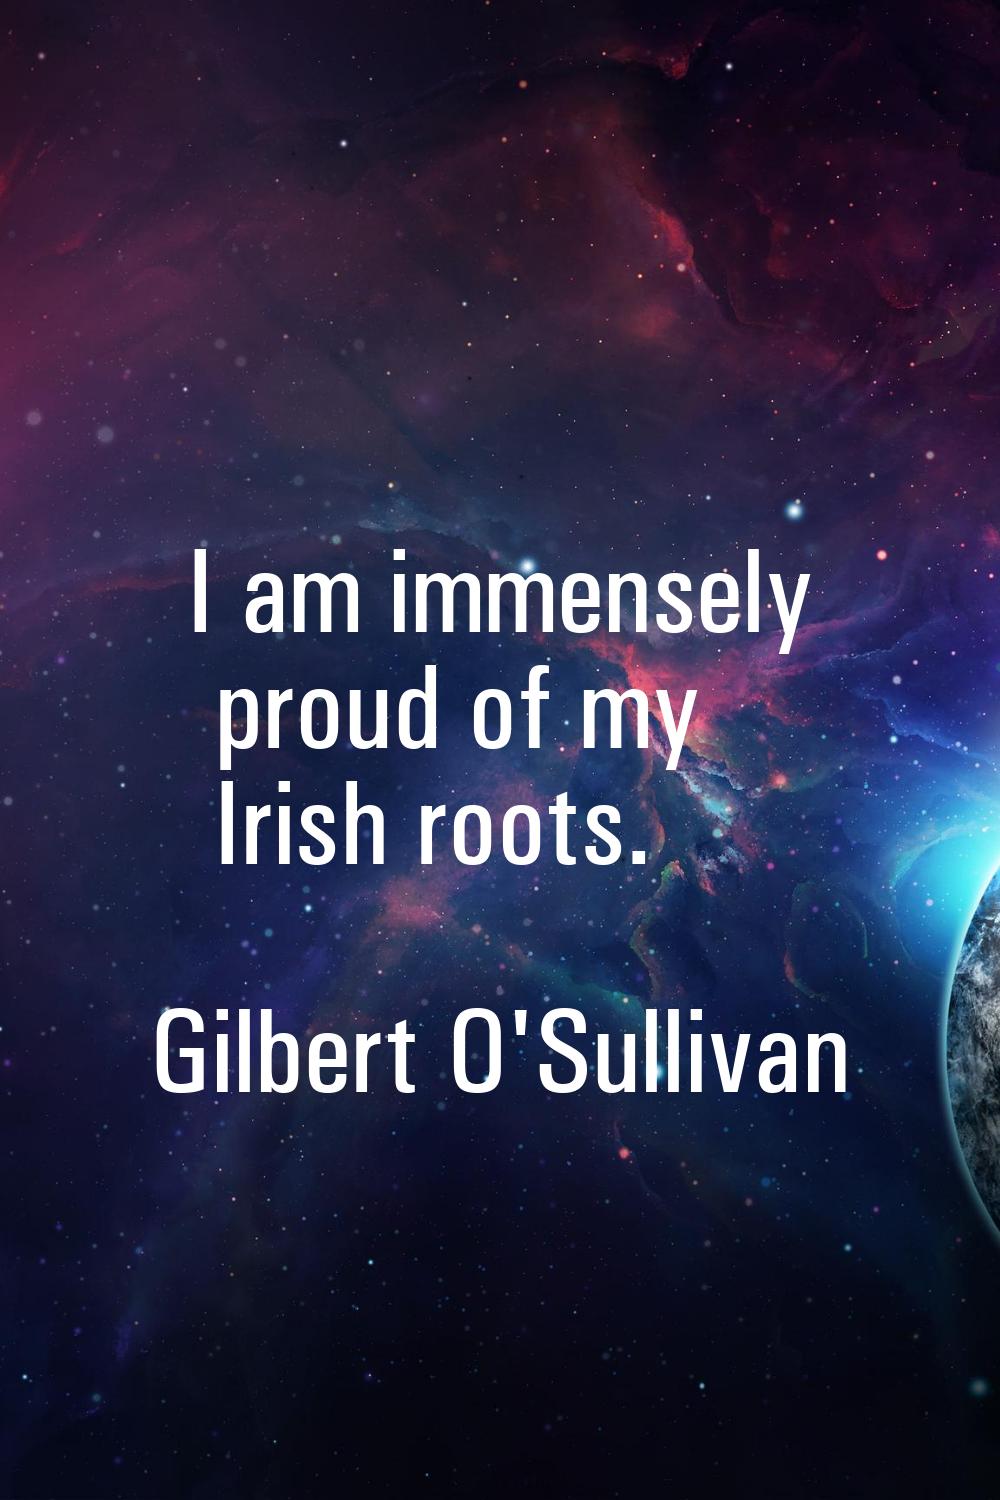 I am immensely proud of my Irish roots.